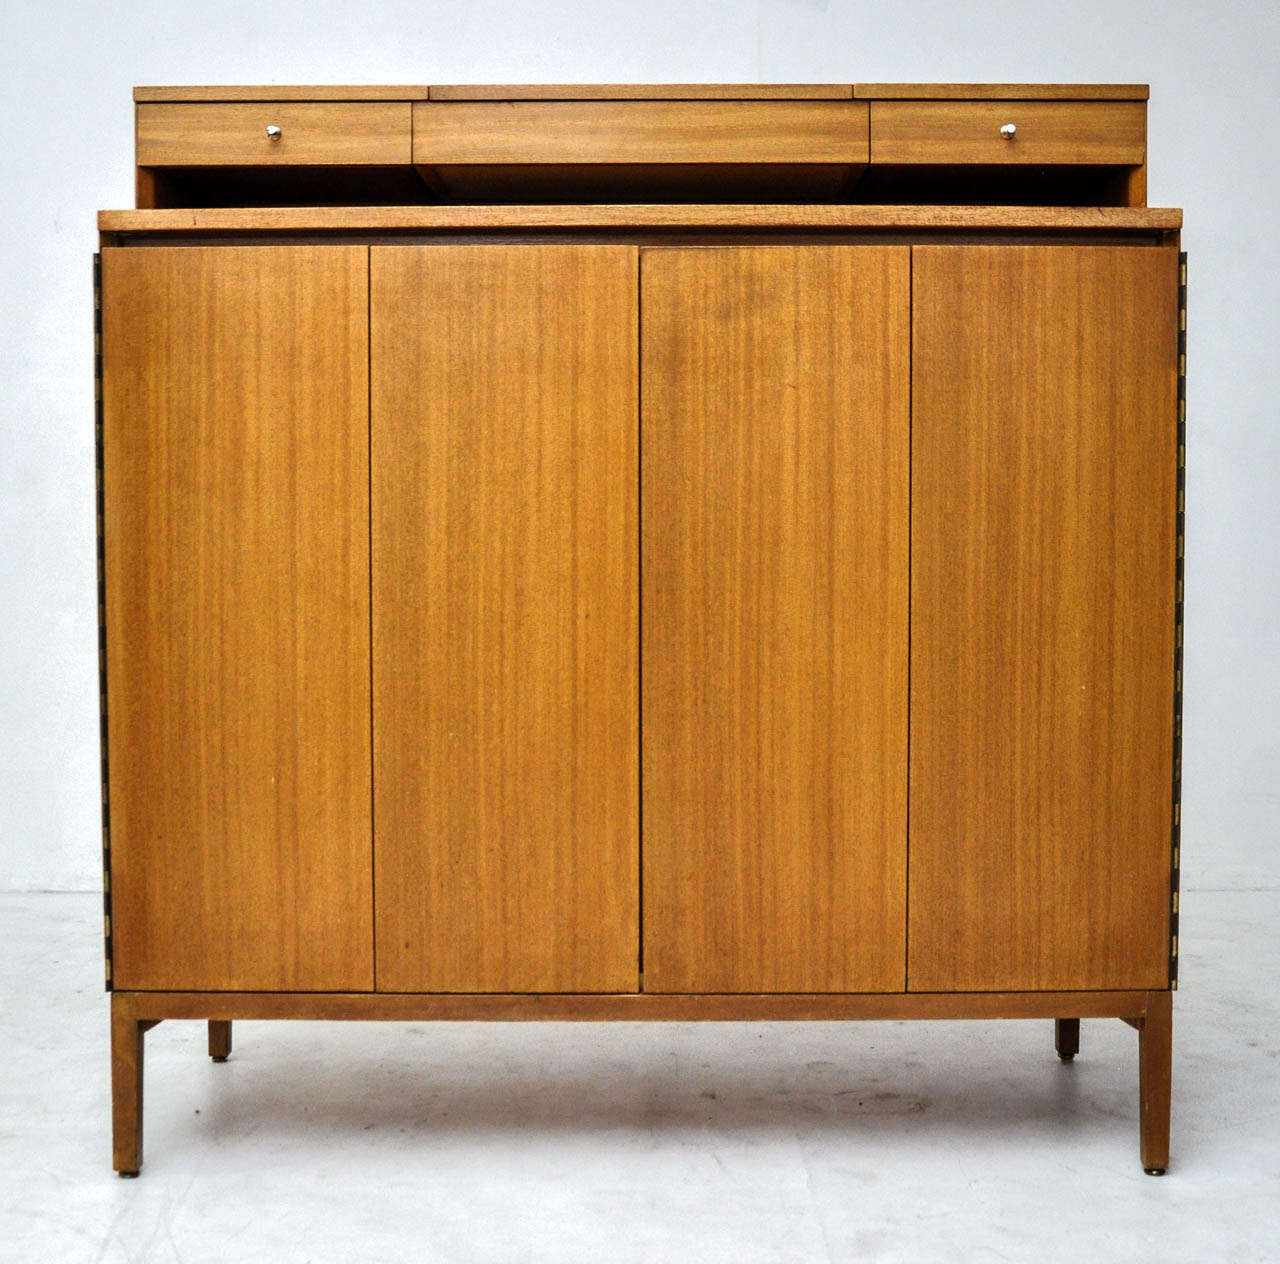 Paul McCobb gentleman's chest dresser. Calvin Series. Lift up mirrored section. Bi fold doors with fitted interior.